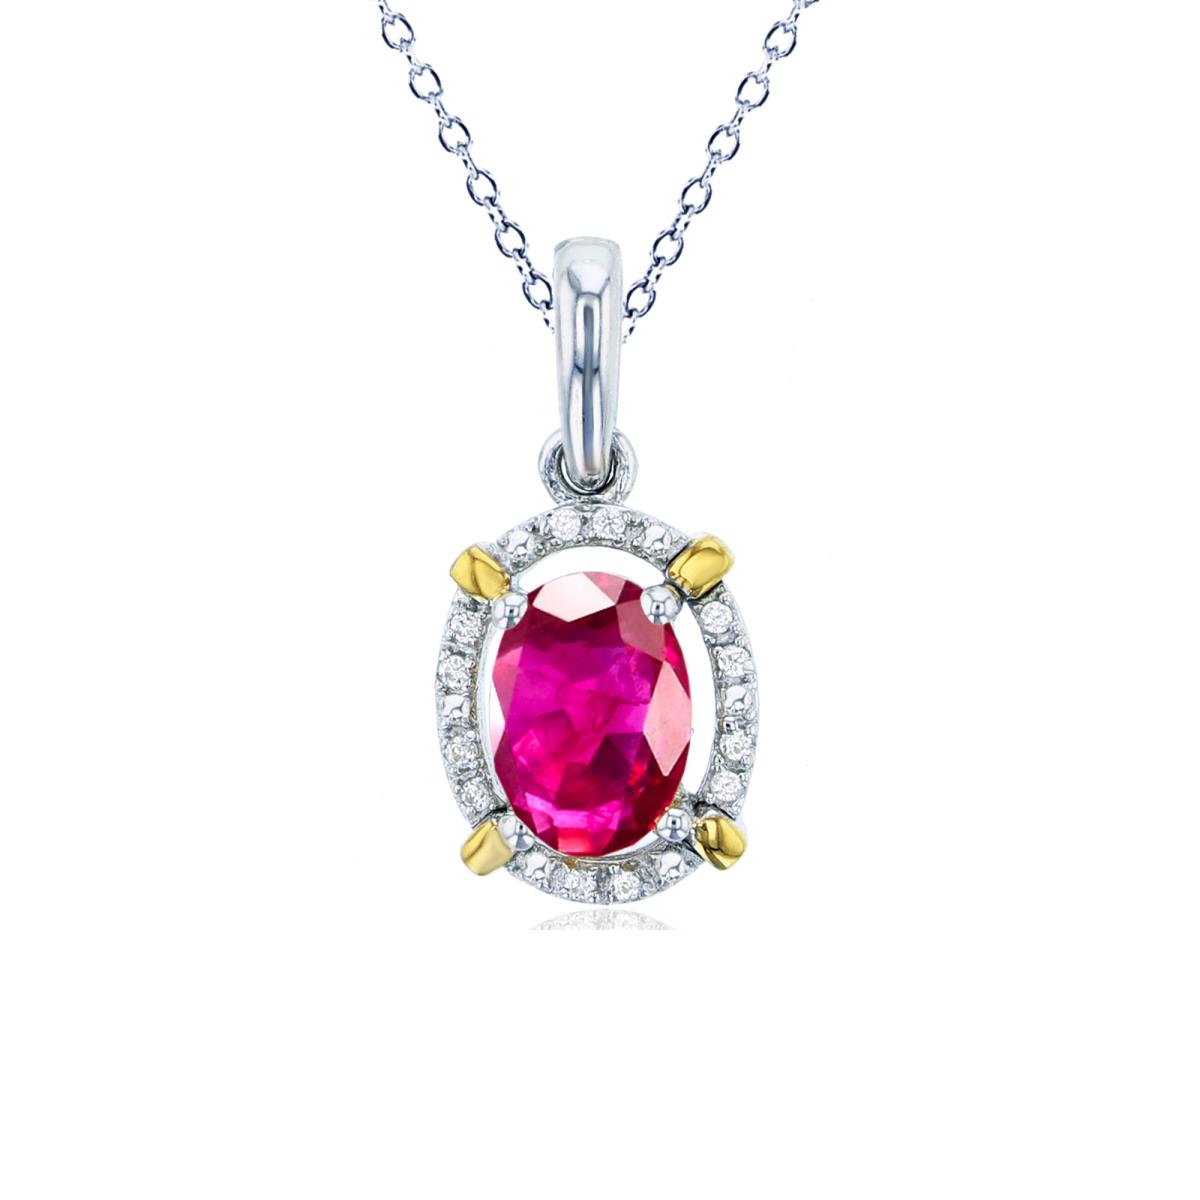 10K Yellow Gold 0.01cttw Rnd Diamonds & 7x5mm Ov Glass Filled Ruby Halo Oval 18"Necklace